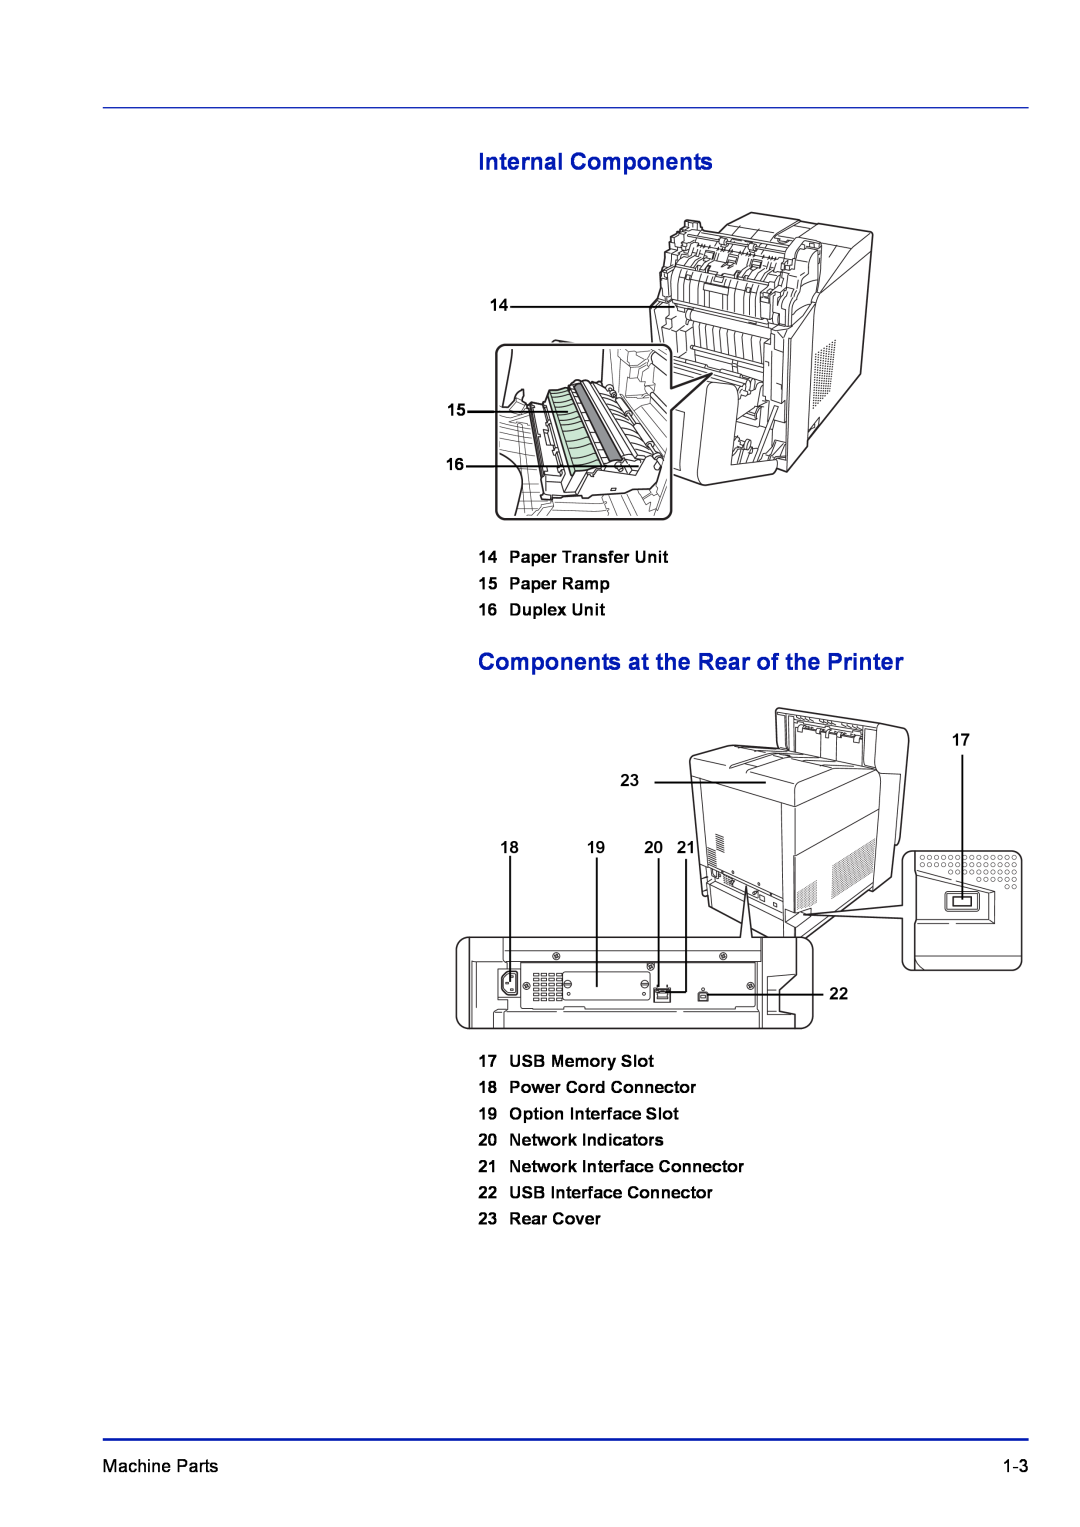 Kyocera FS-1100, FS-C5400DN, FS-1300D manual Internal Components, Components at the Rear of the Printer 